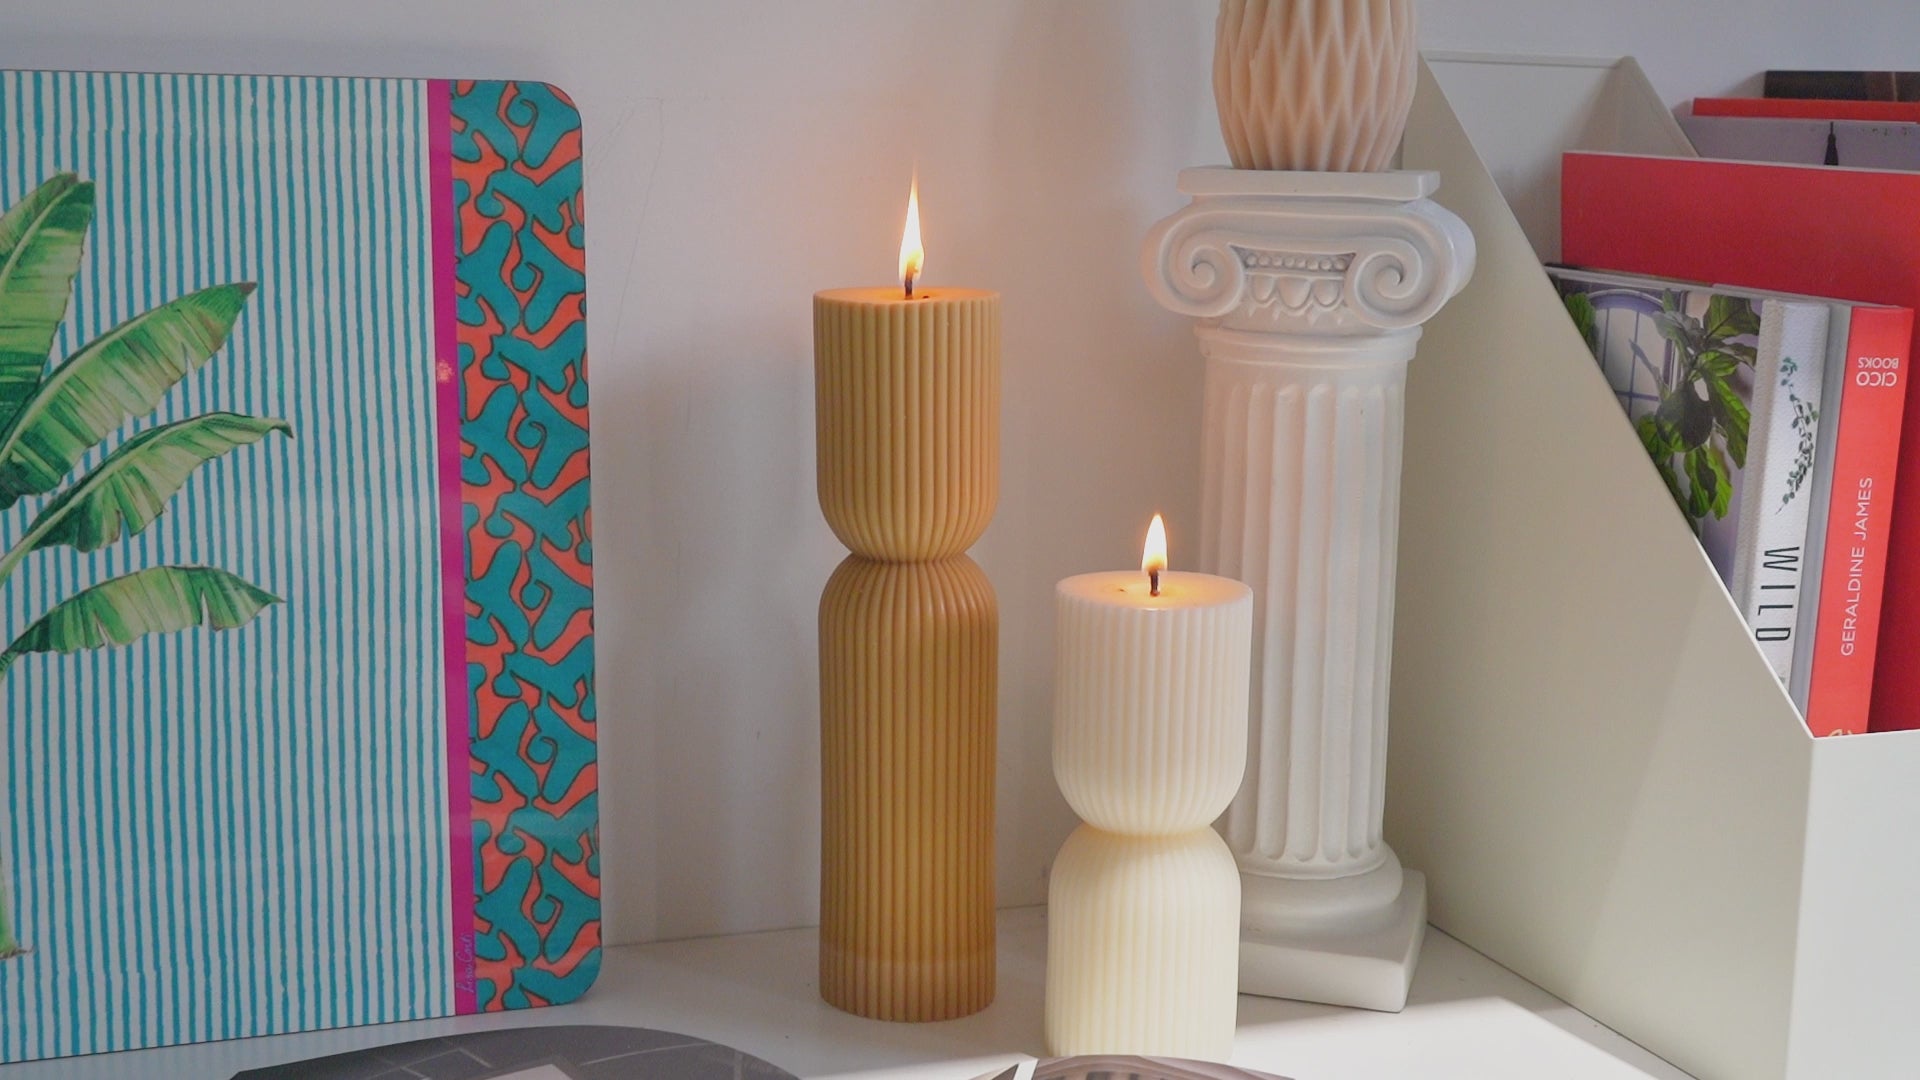 Ribbed Pillar Candle Silicone Mold